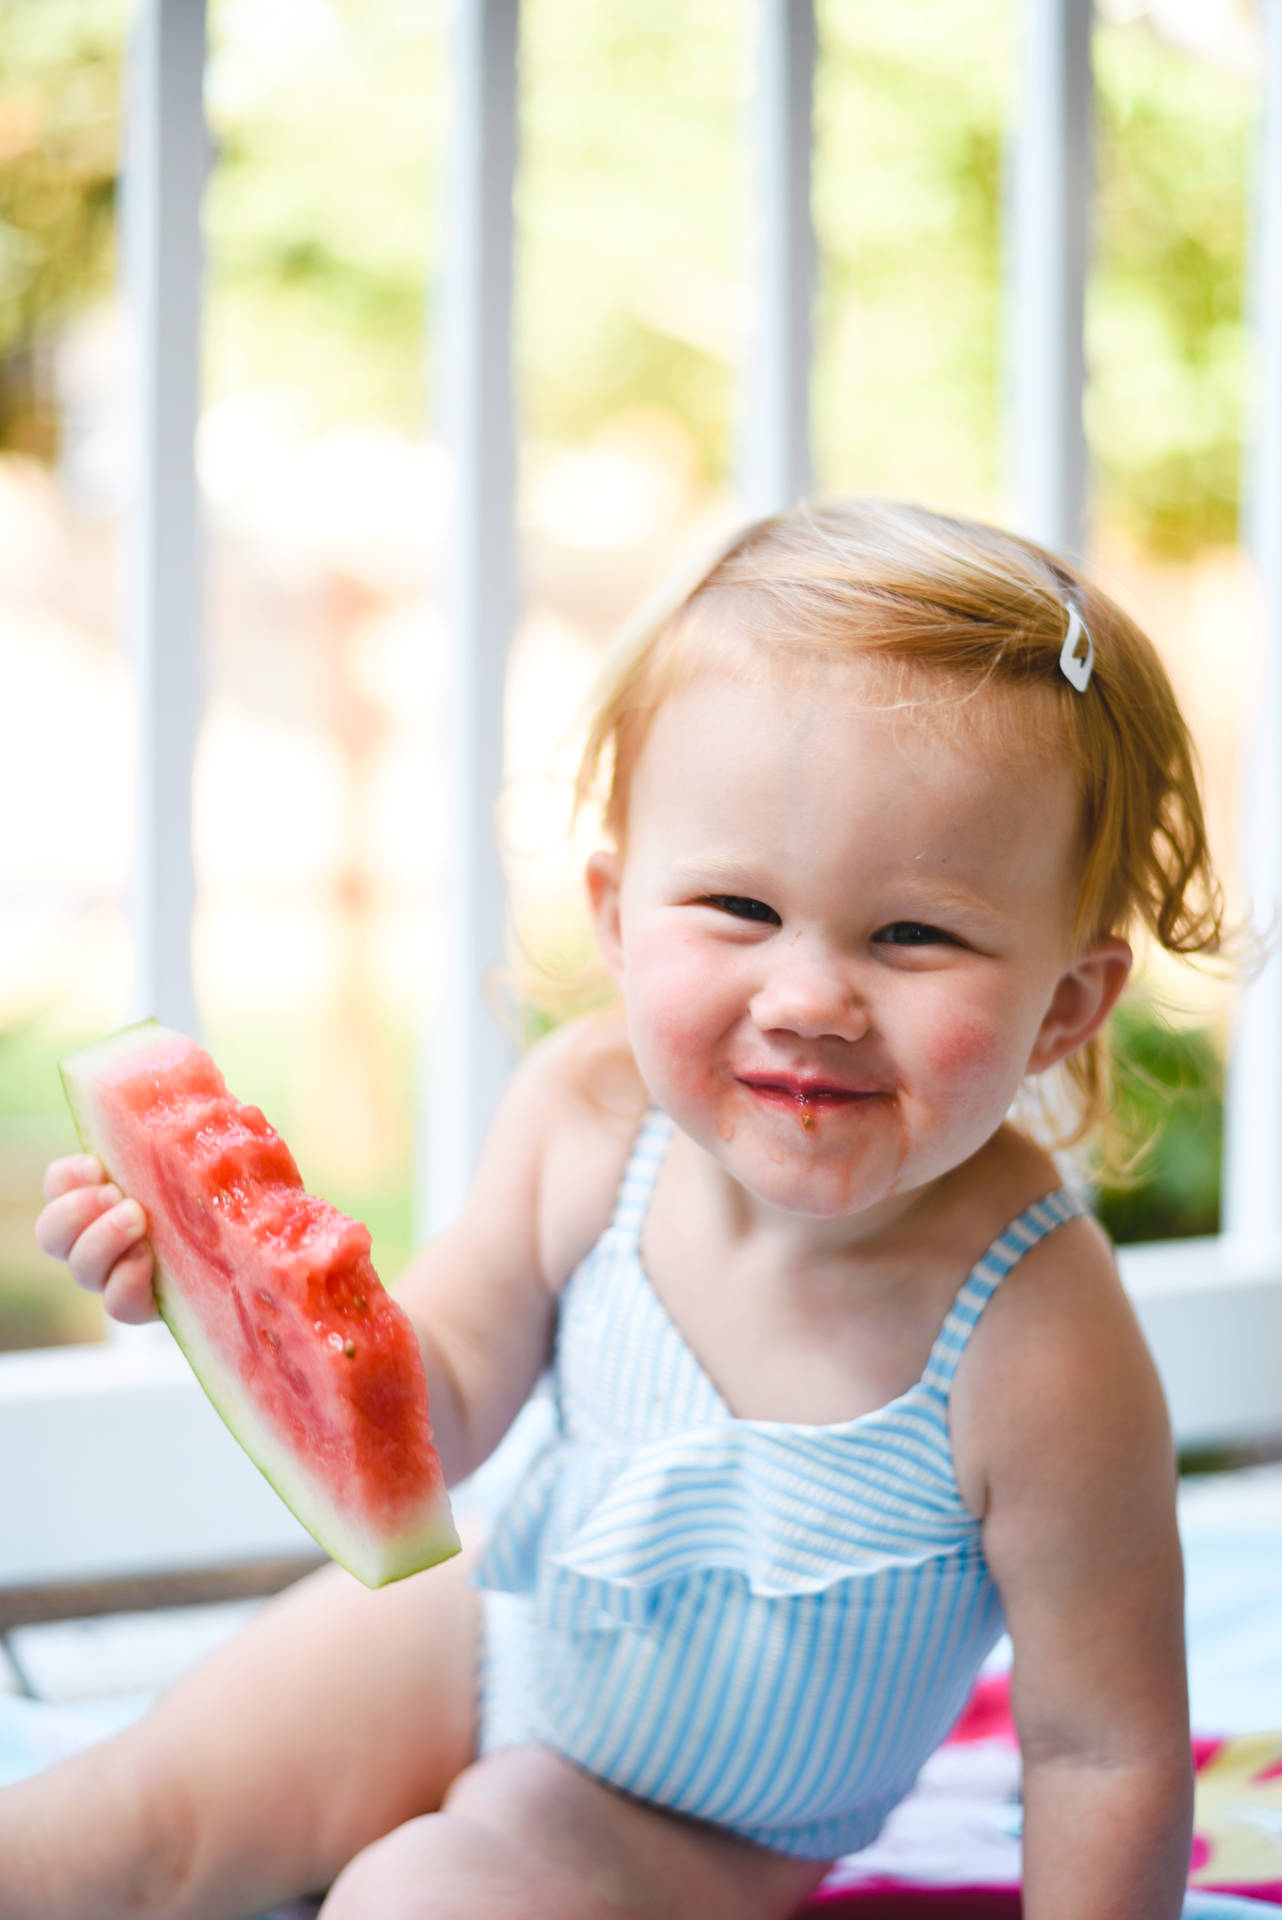 Smiling Baby With Watermelon